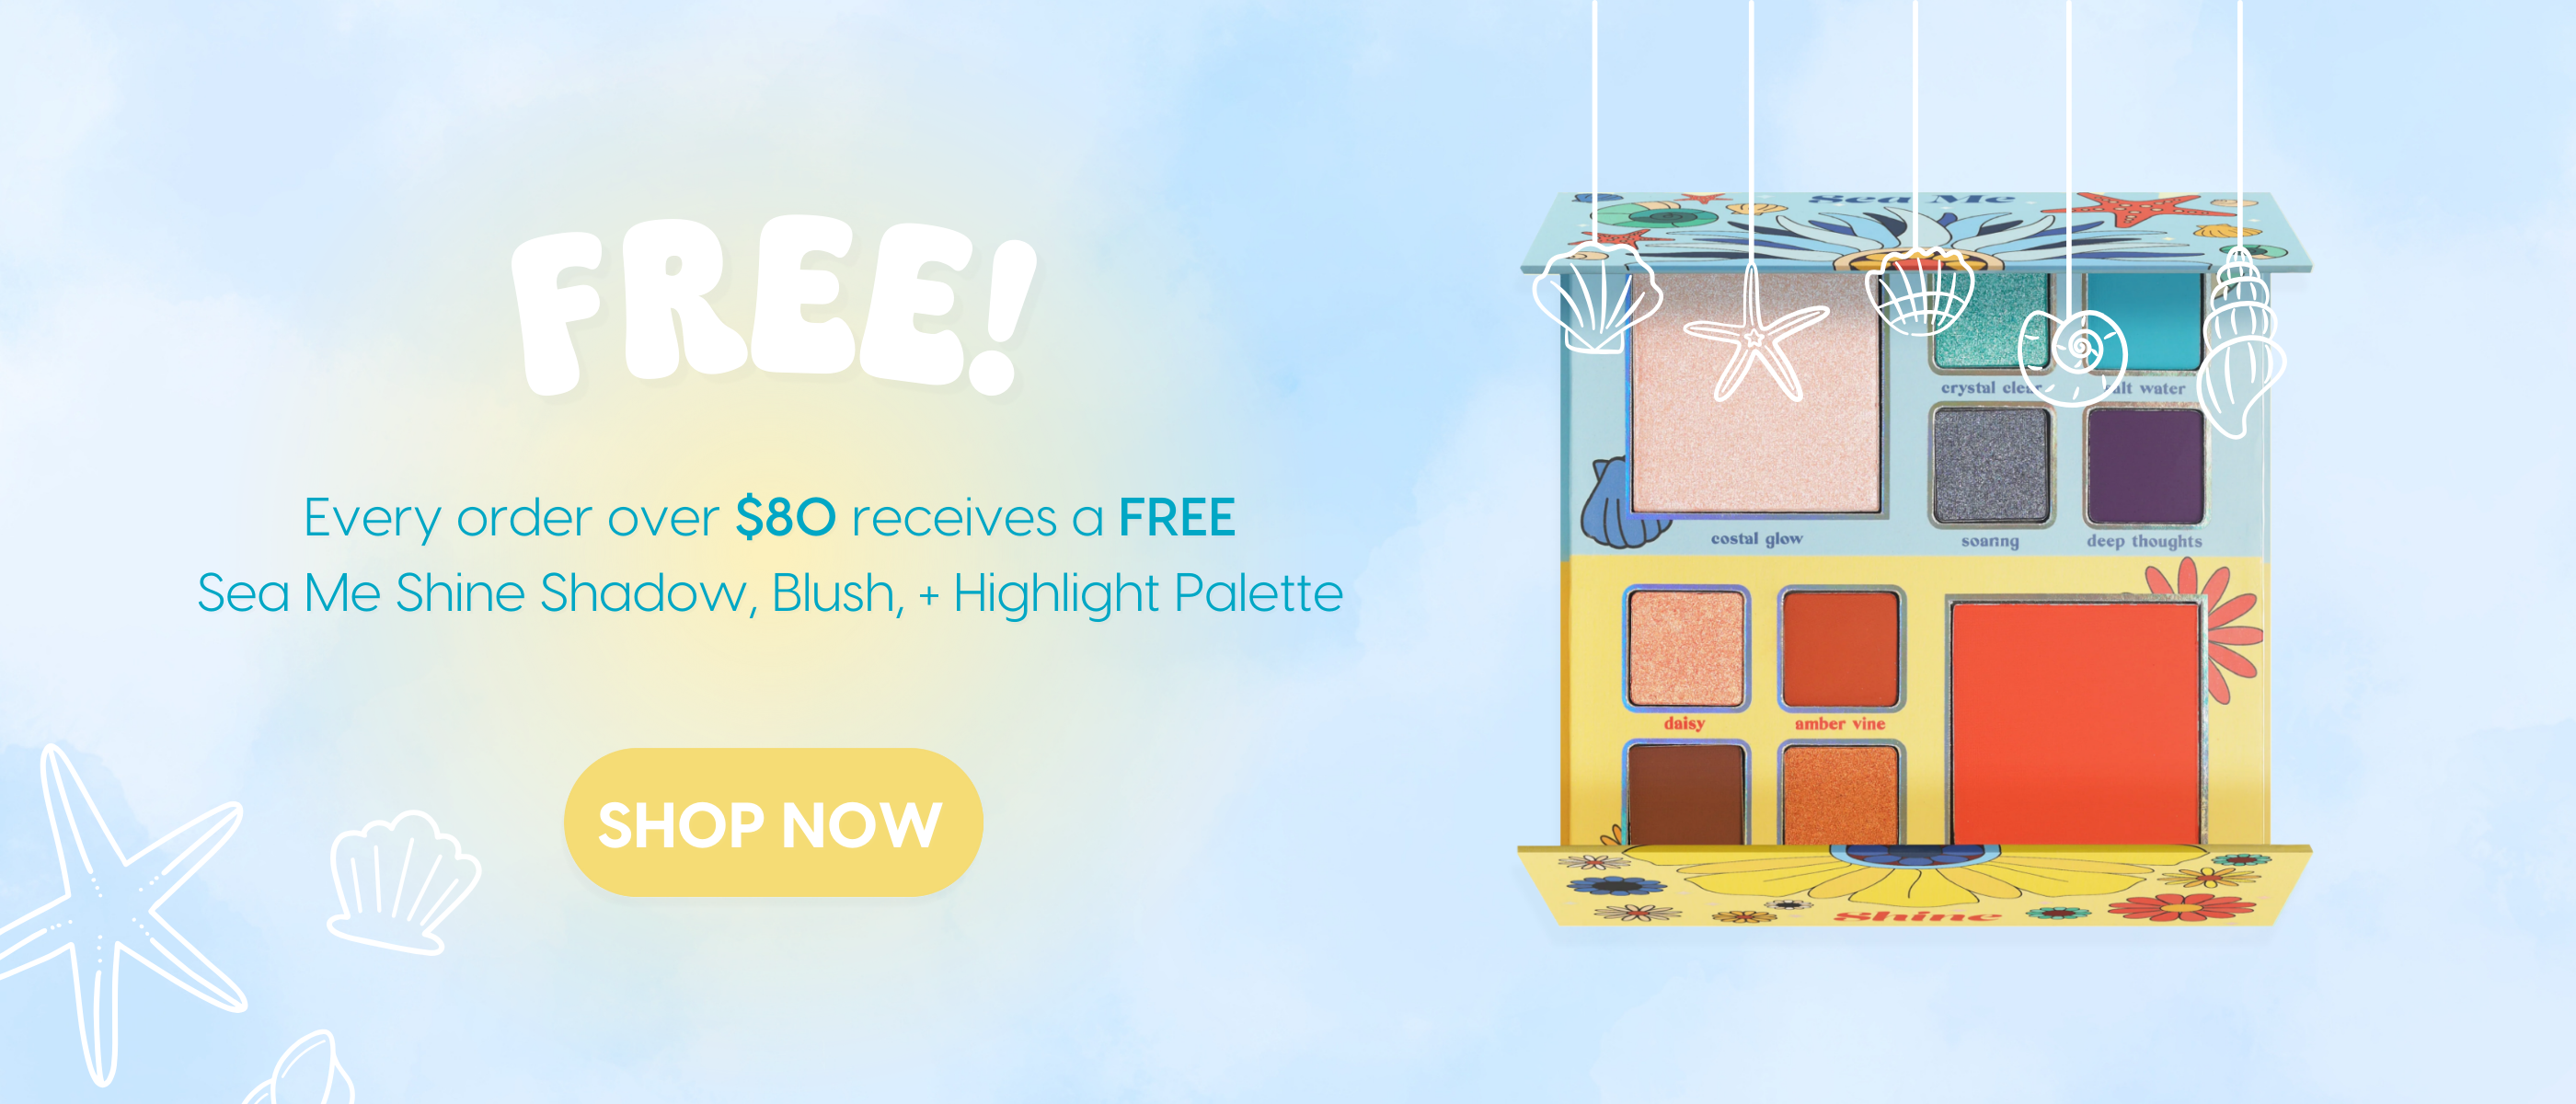 FREE palette all orders over $80